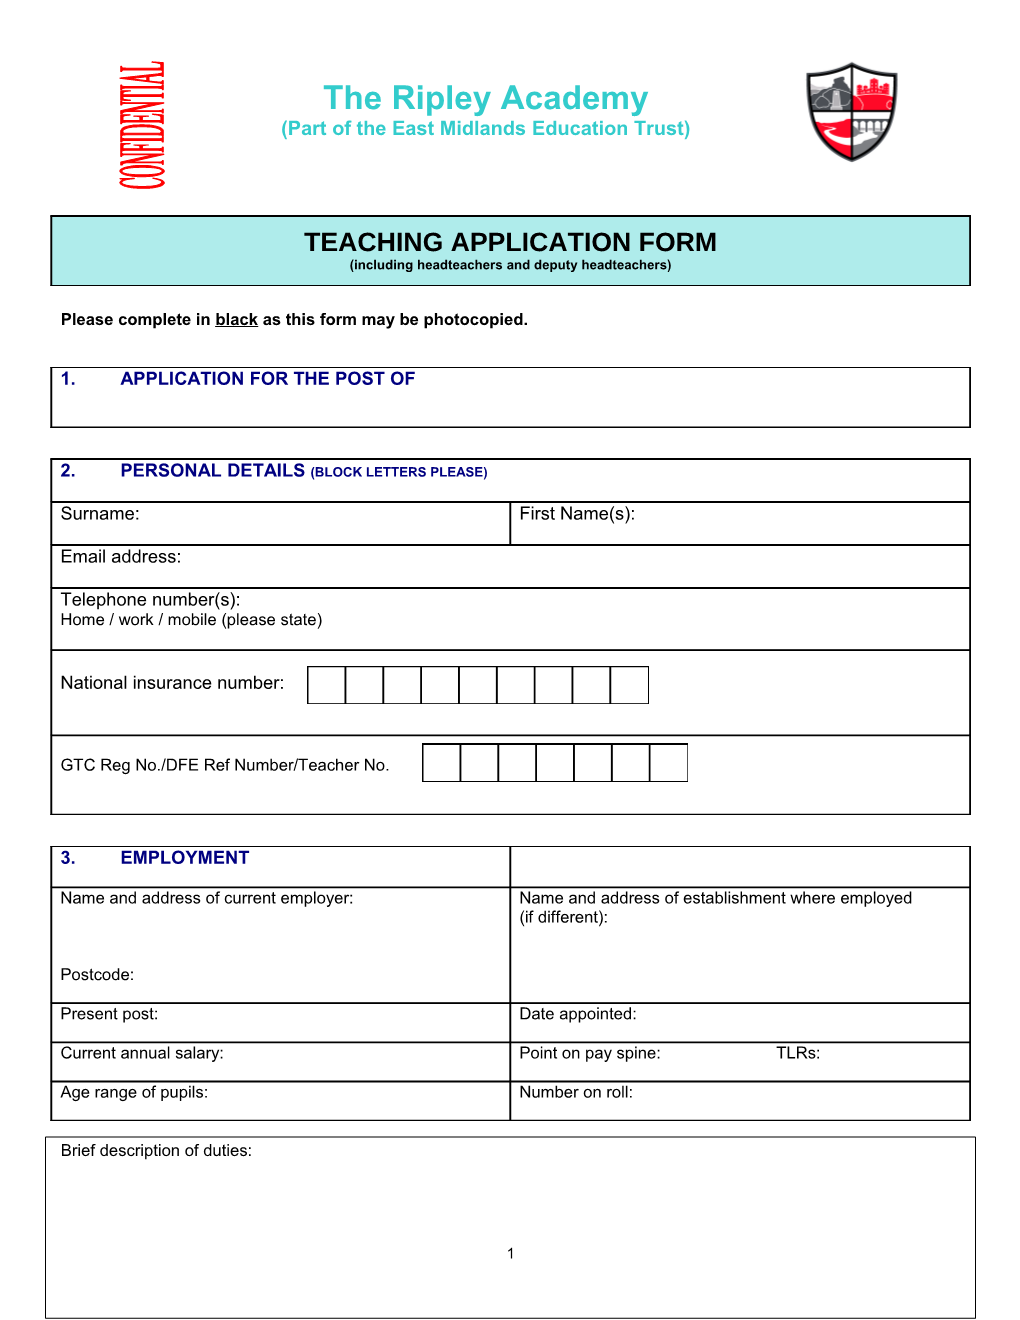 Please Complete in Black As This Form May Be Photocopied